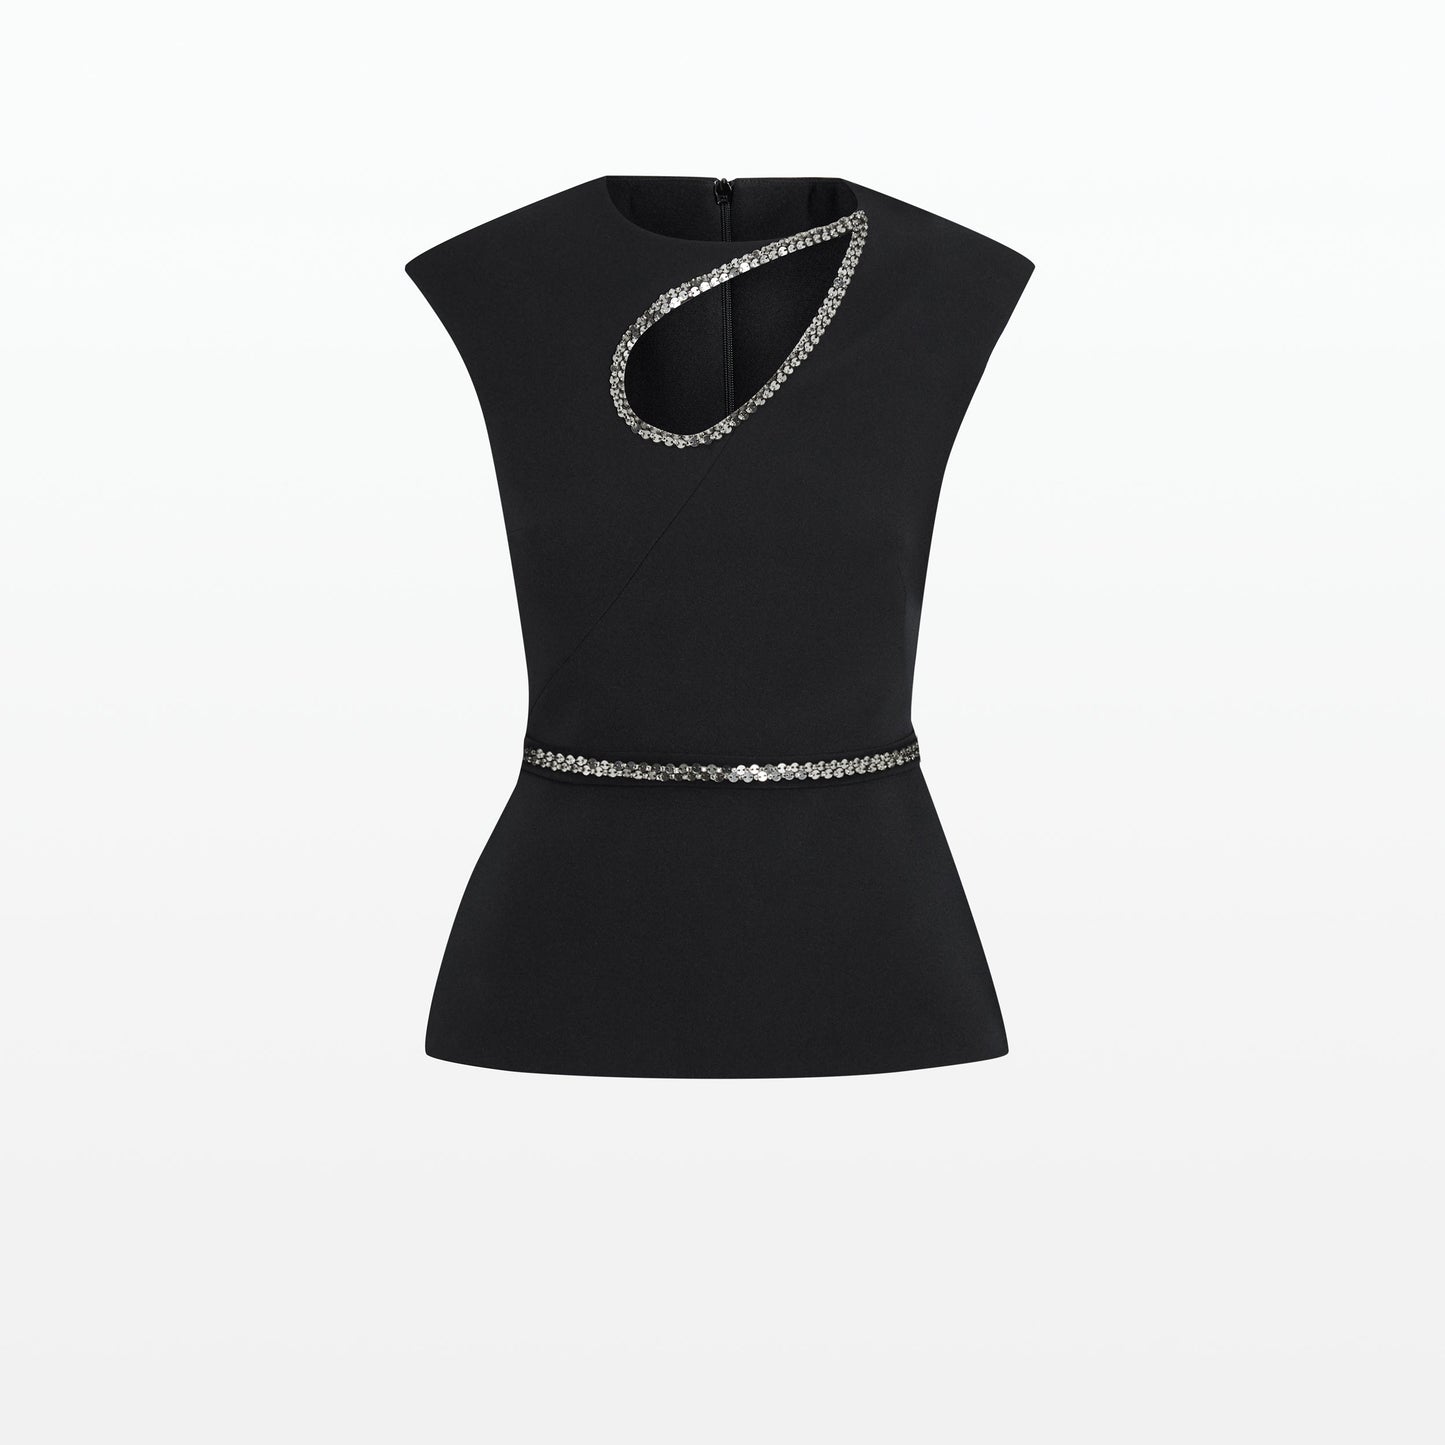 Carina Black Top With Embroidered Belt